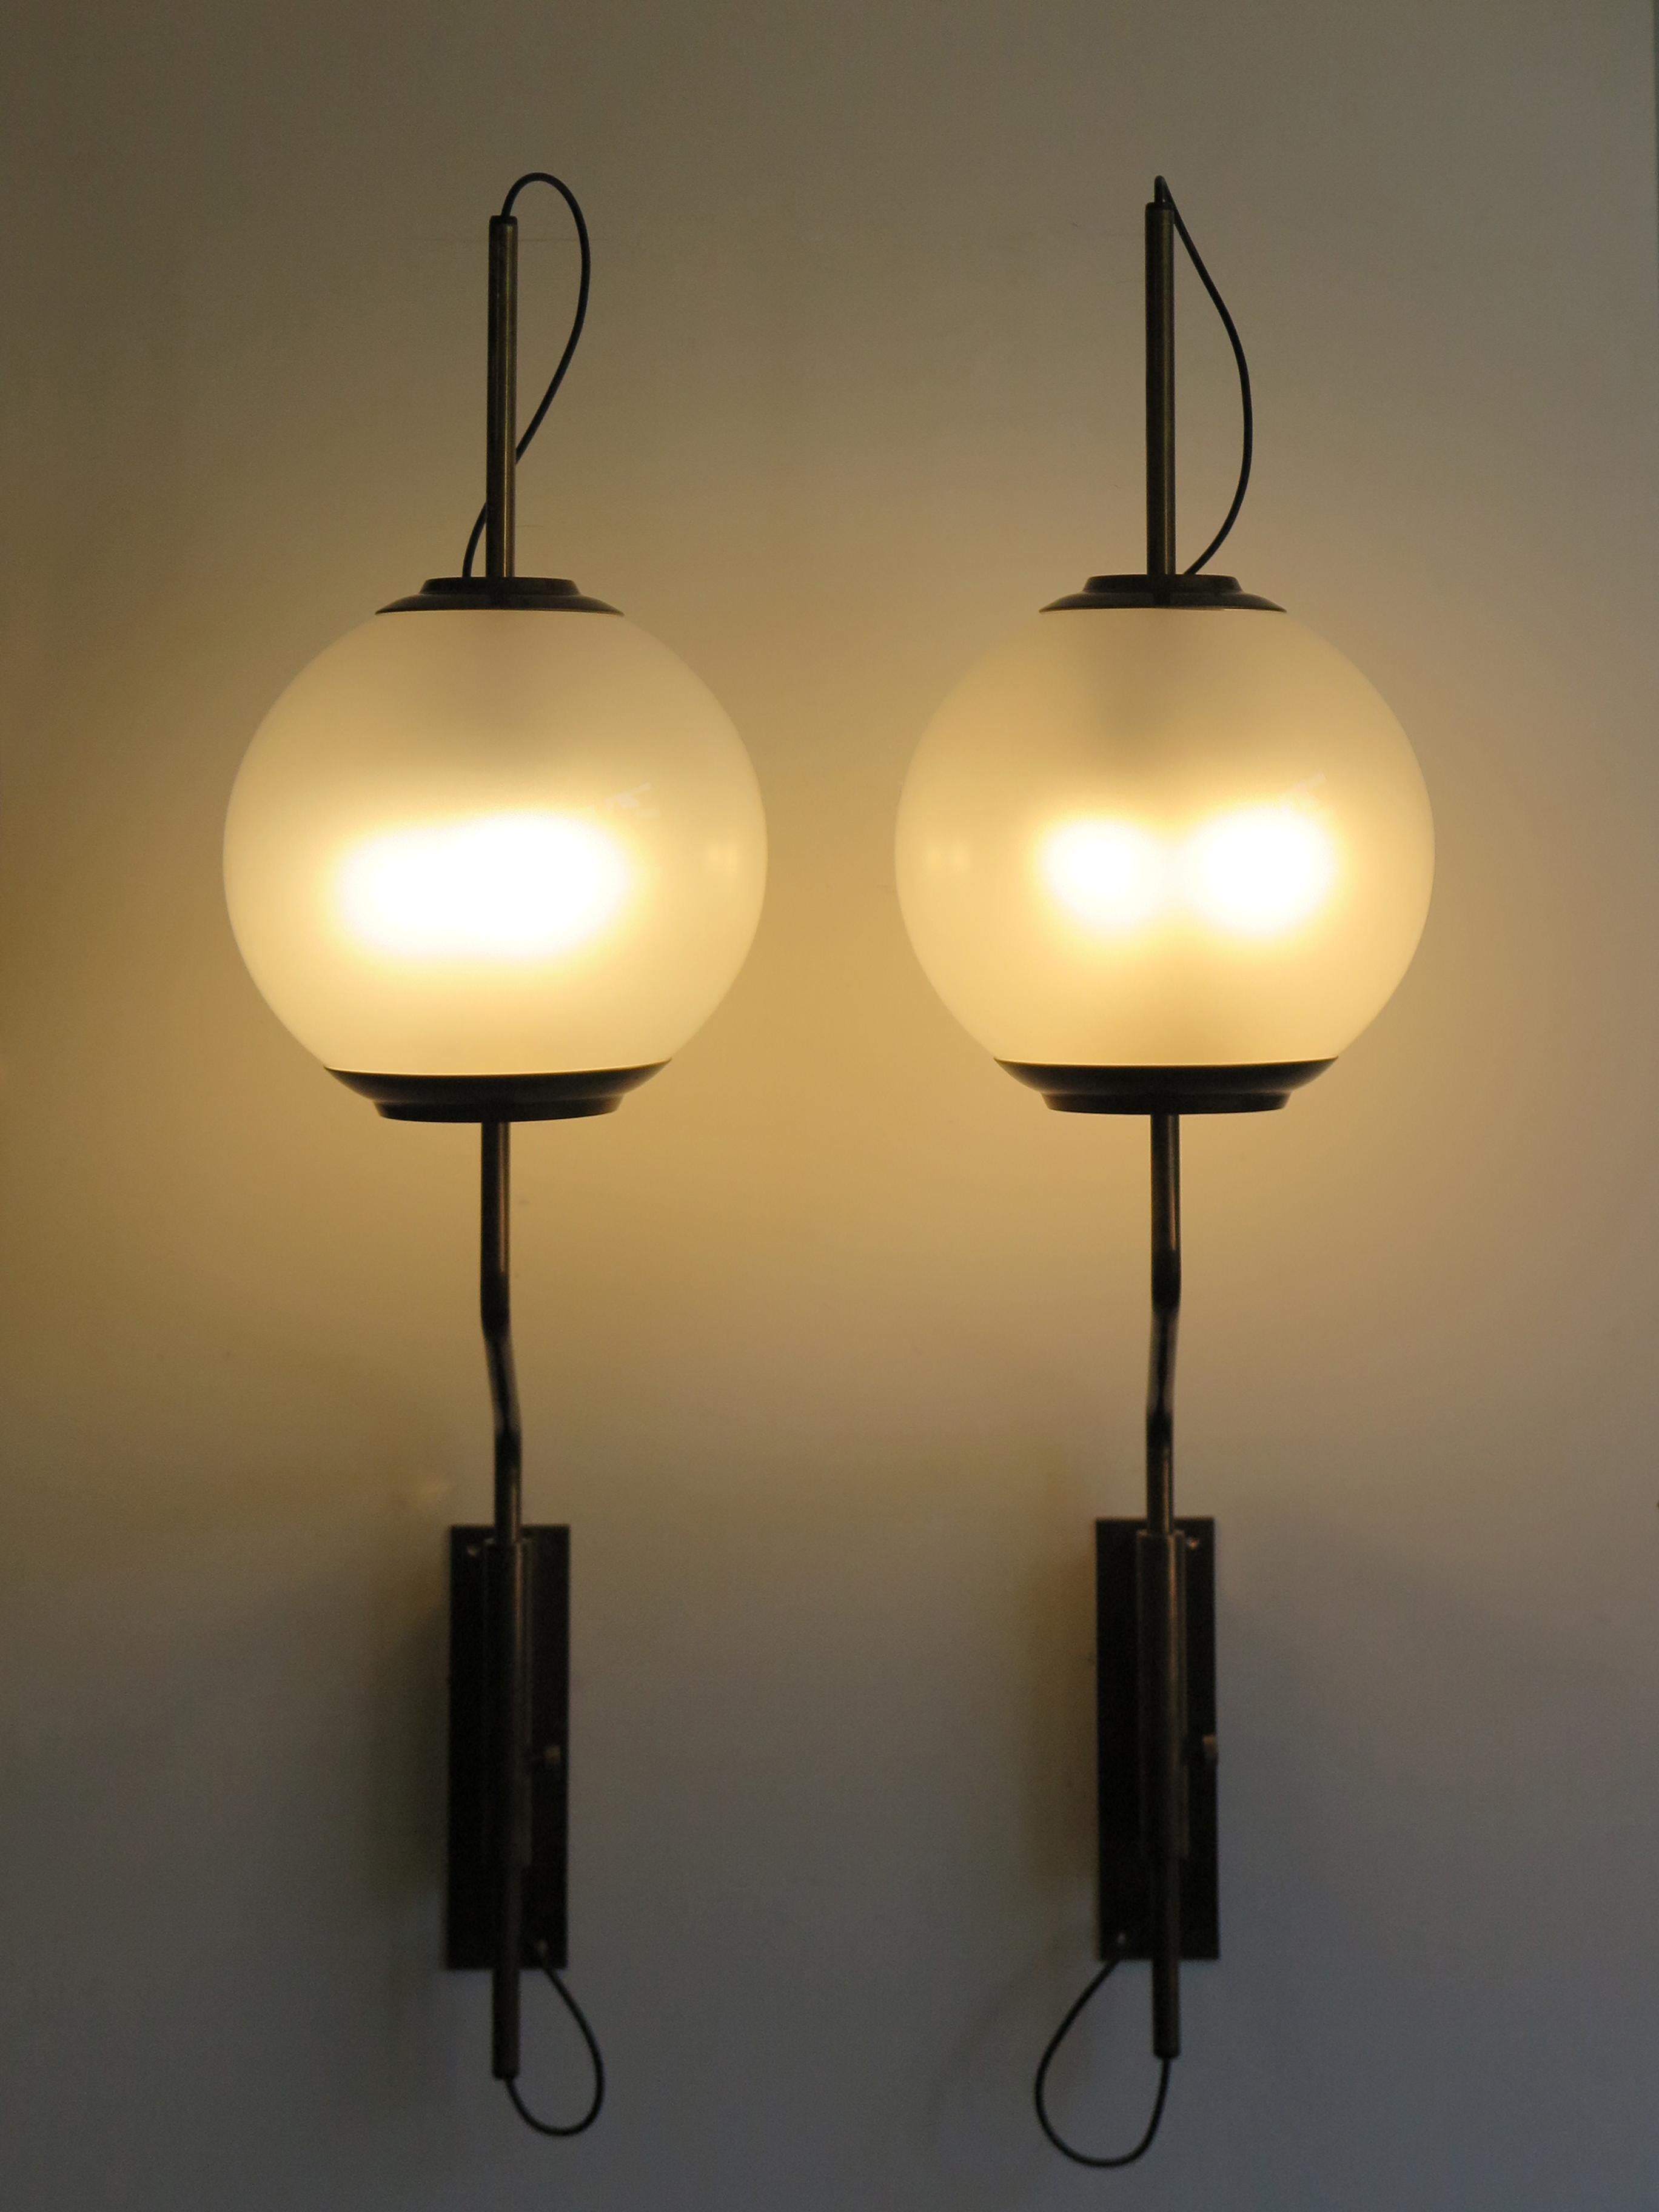 Large Italian Mid-Century Modern design height-adjustable set of two sconces wall lamps model LP11 designed by Luigi Caccia Dominioni for Azucena in 1958 with brass structure and glass spheres.
Manufacturer’s signature engraved on the brass